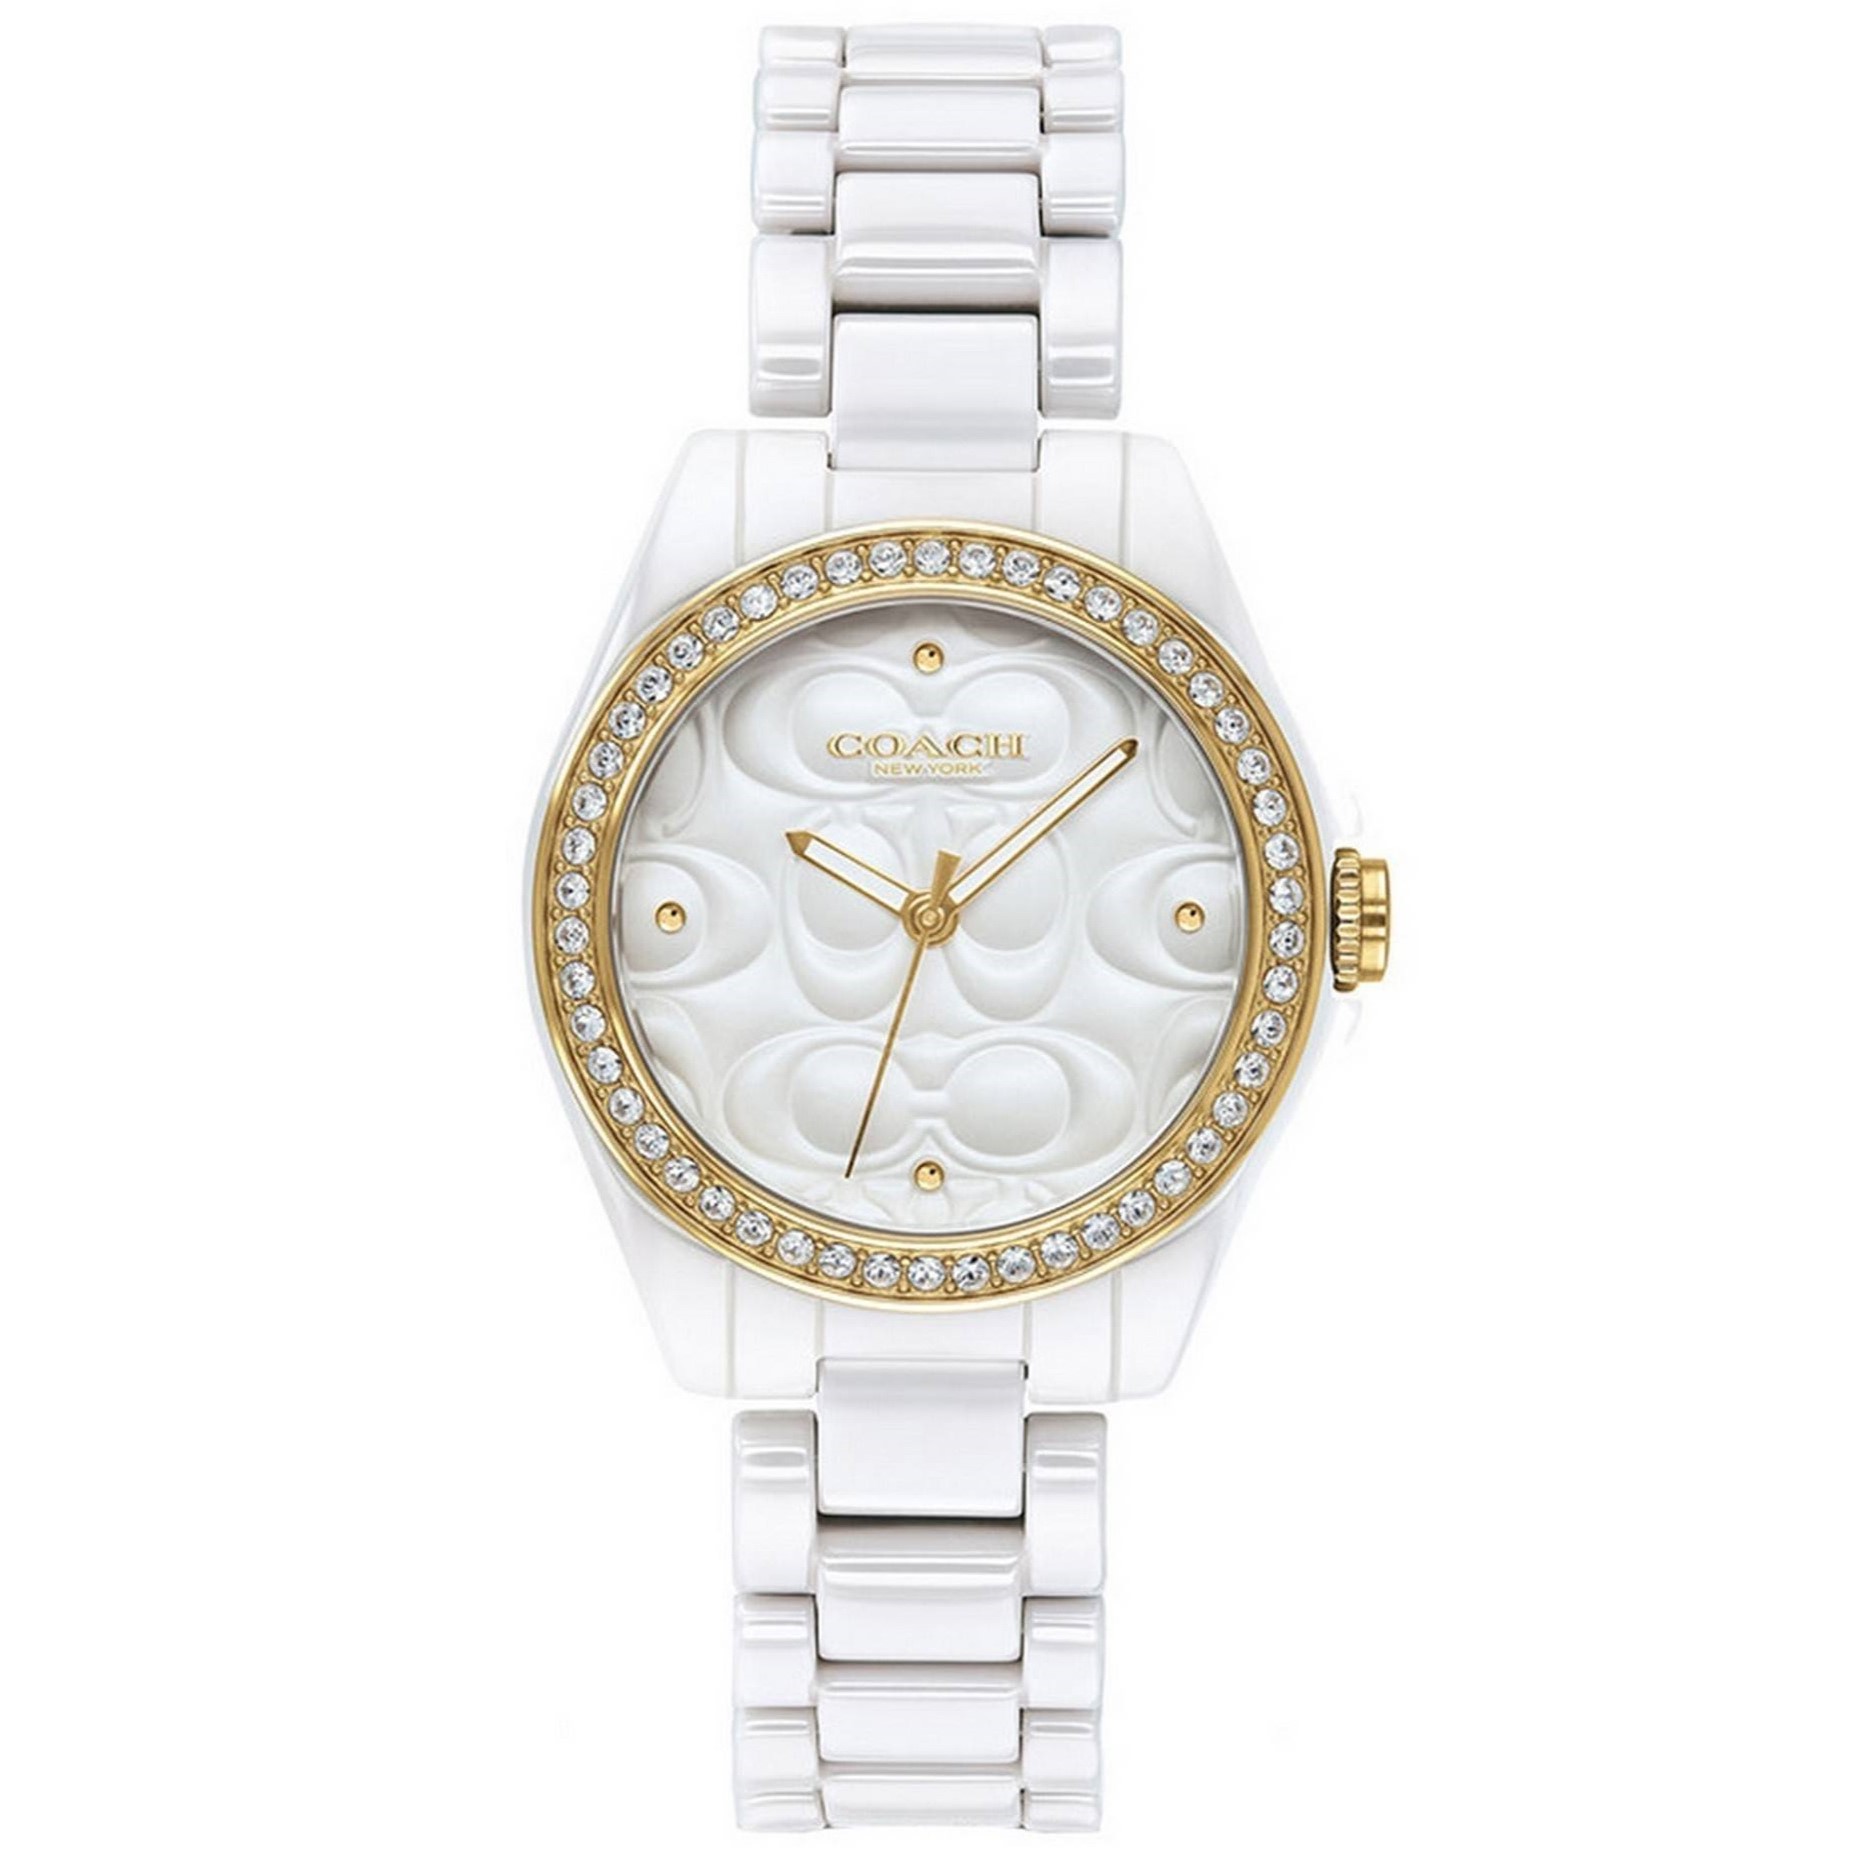 ĐỒNG HỒ NỮ COACH ASTOR WHITE DIAL CRYSTAL ACCENTS QUARTZ 14503254 WOMENS WATCH 7